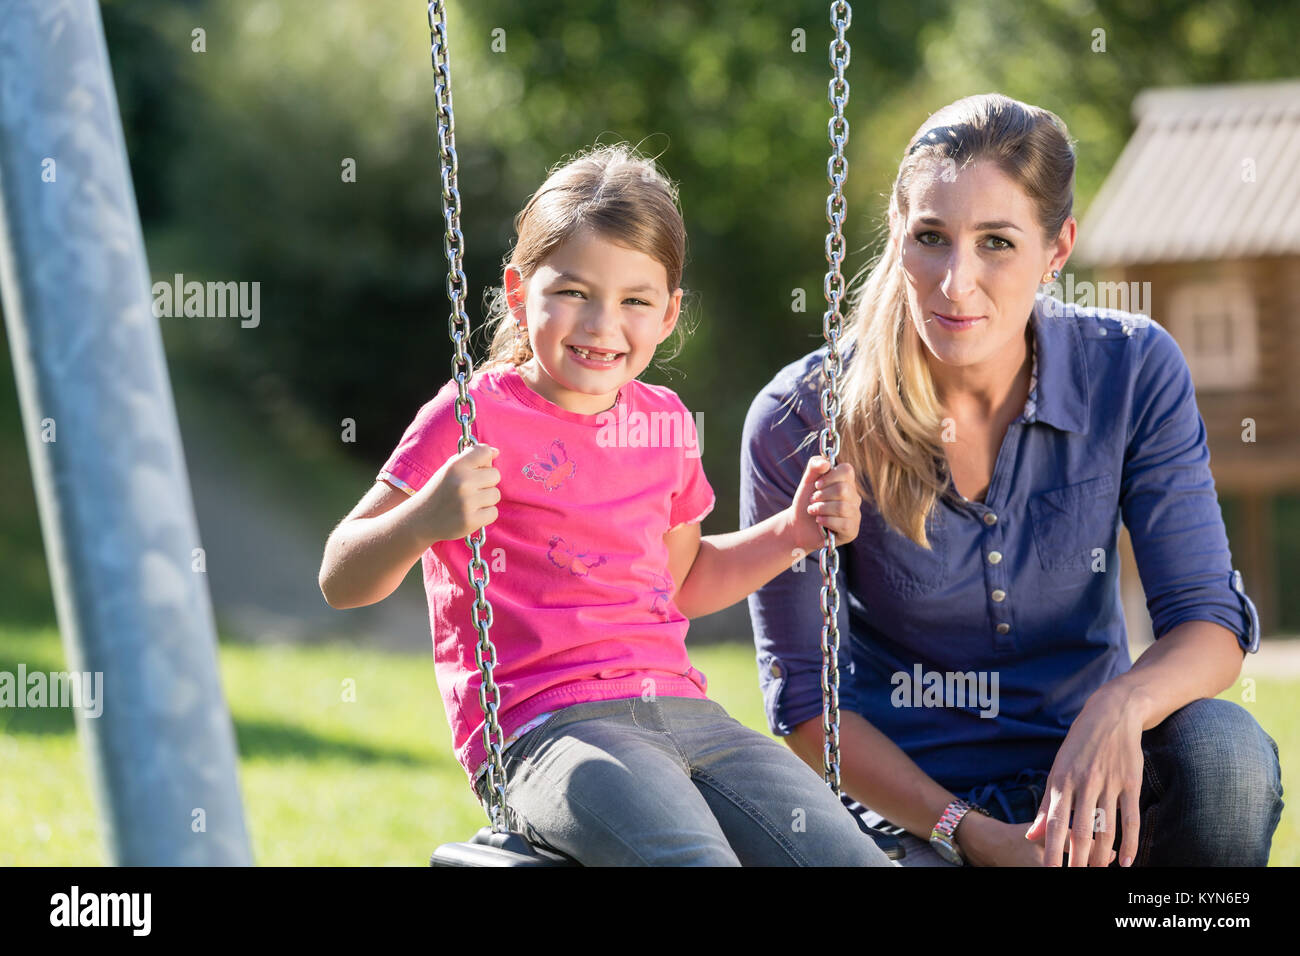 Woman with laughing girl on swing having fun together Stock Photo